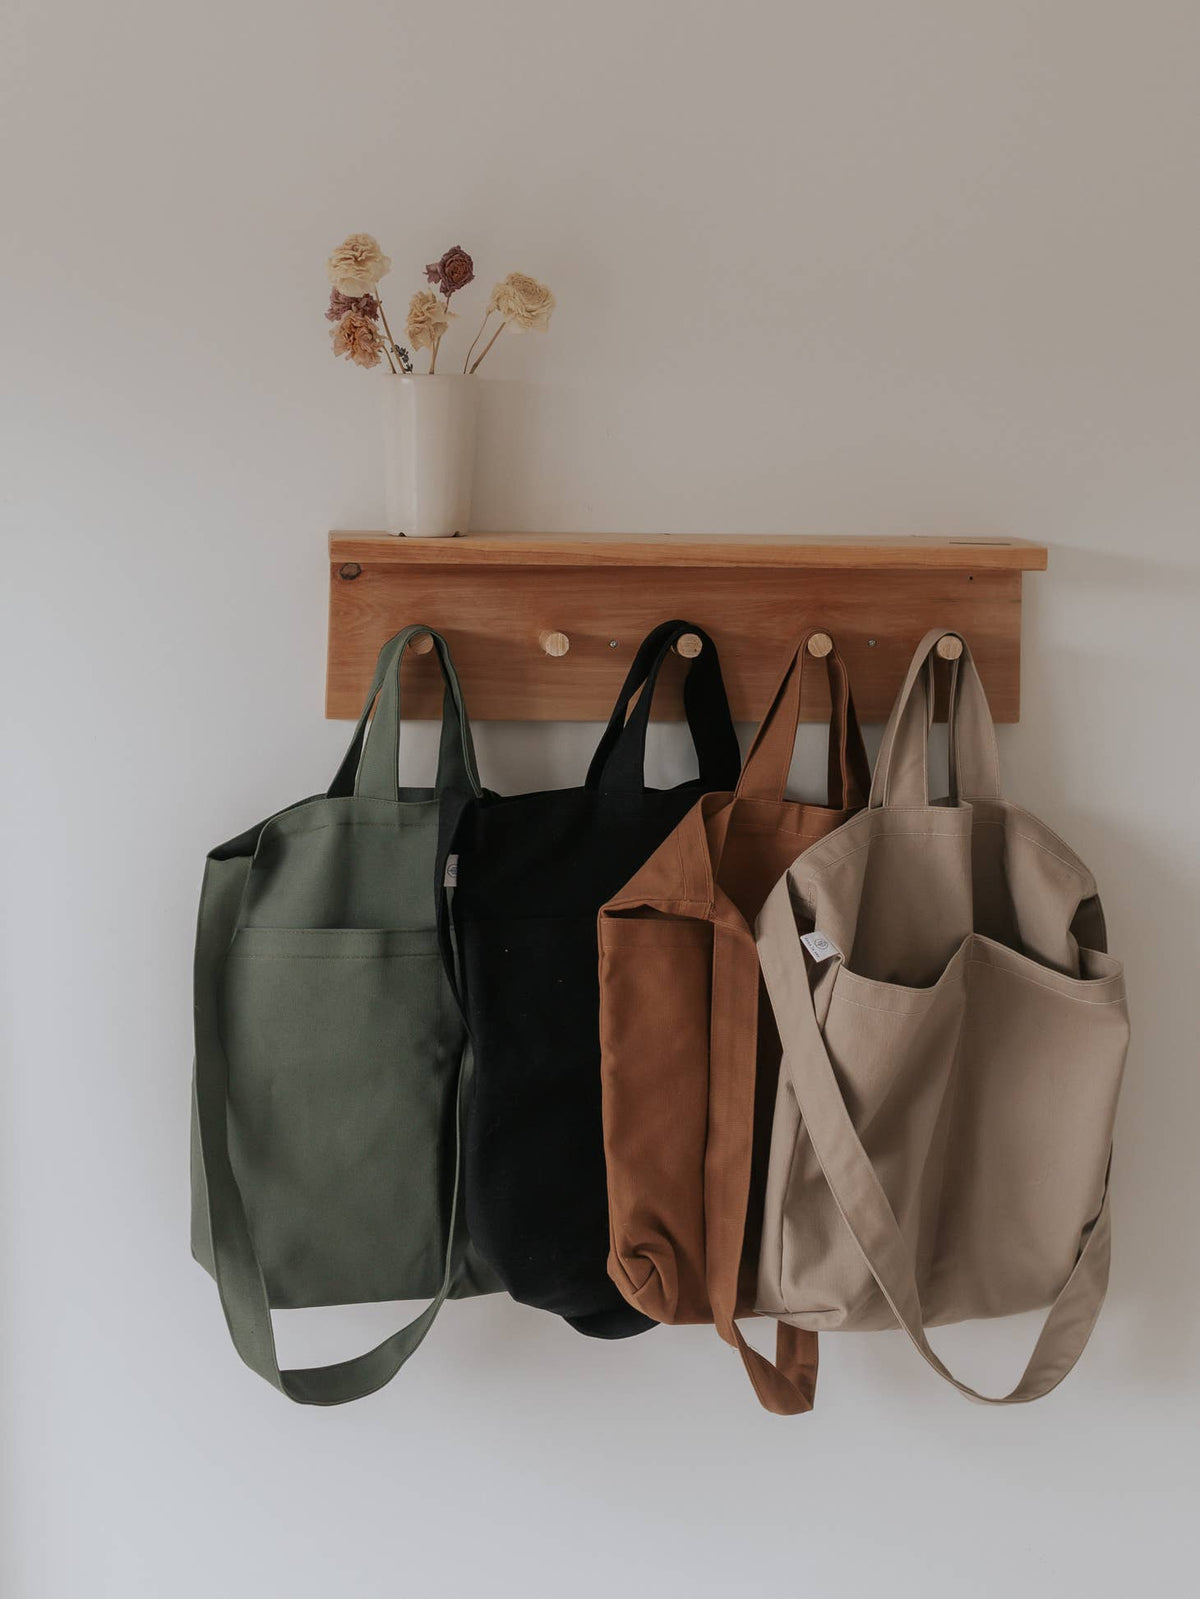 Double Pocket Tote Bags Hanging 